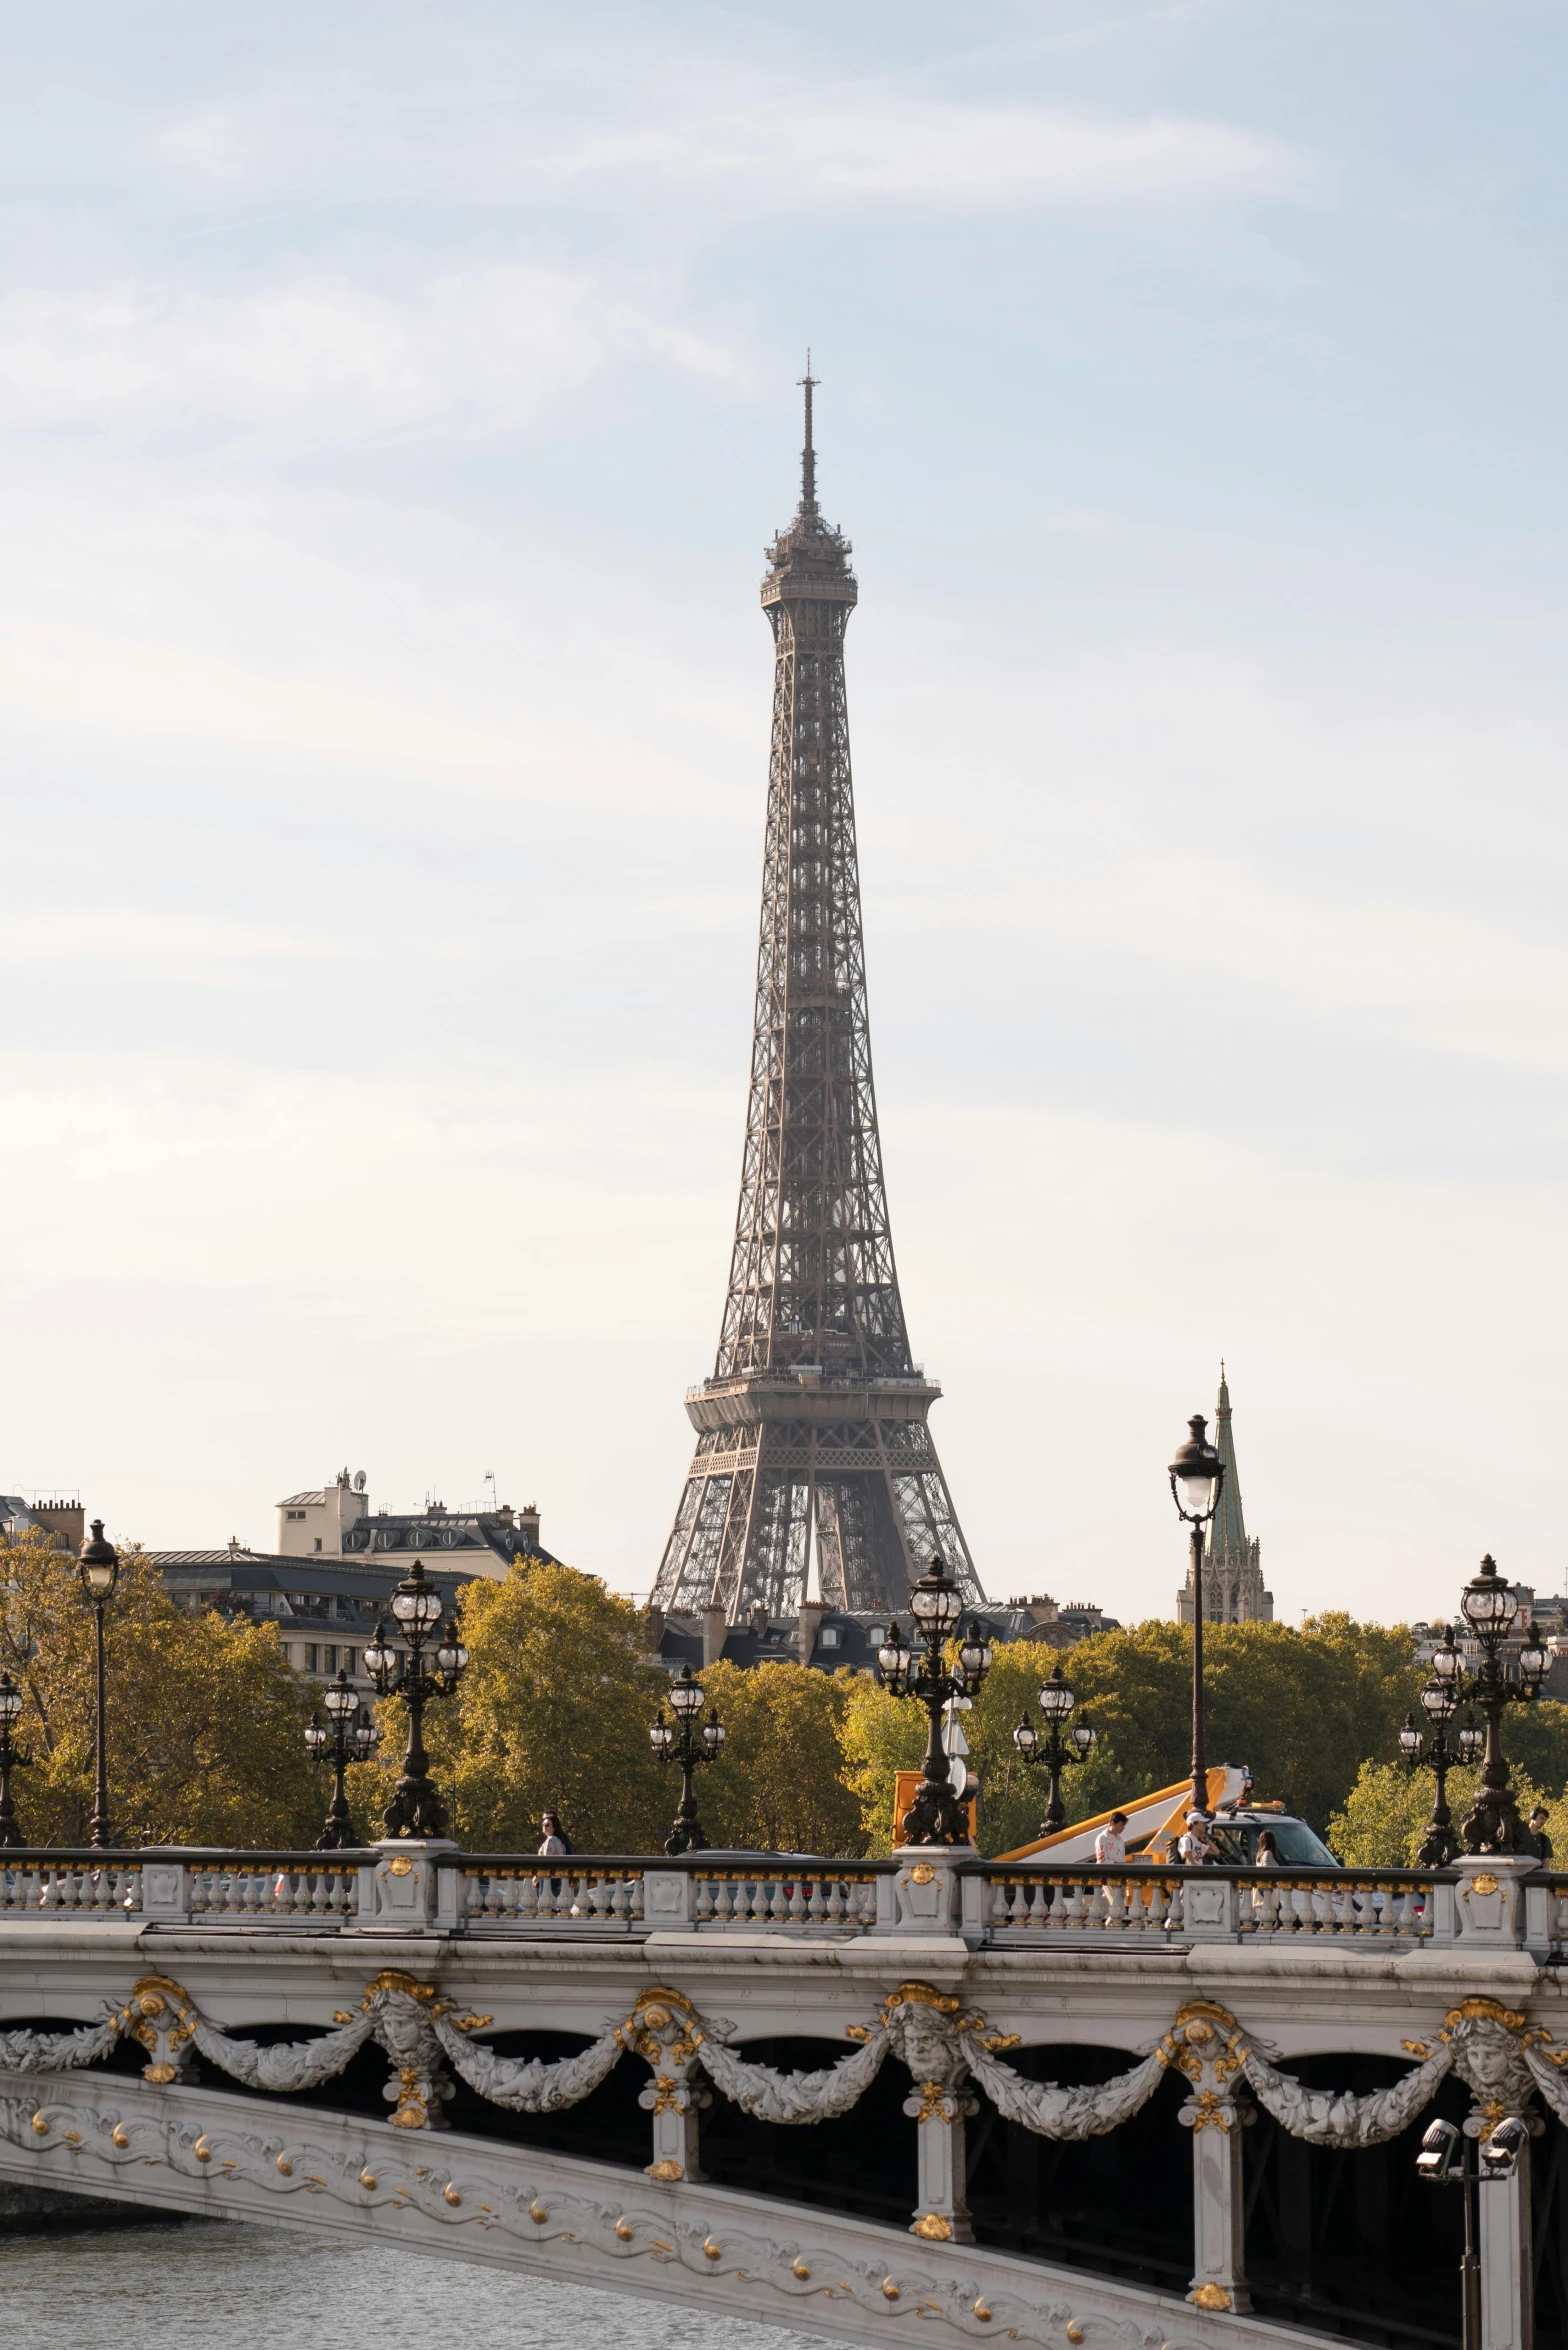 the view of the eiffel tower from across the river